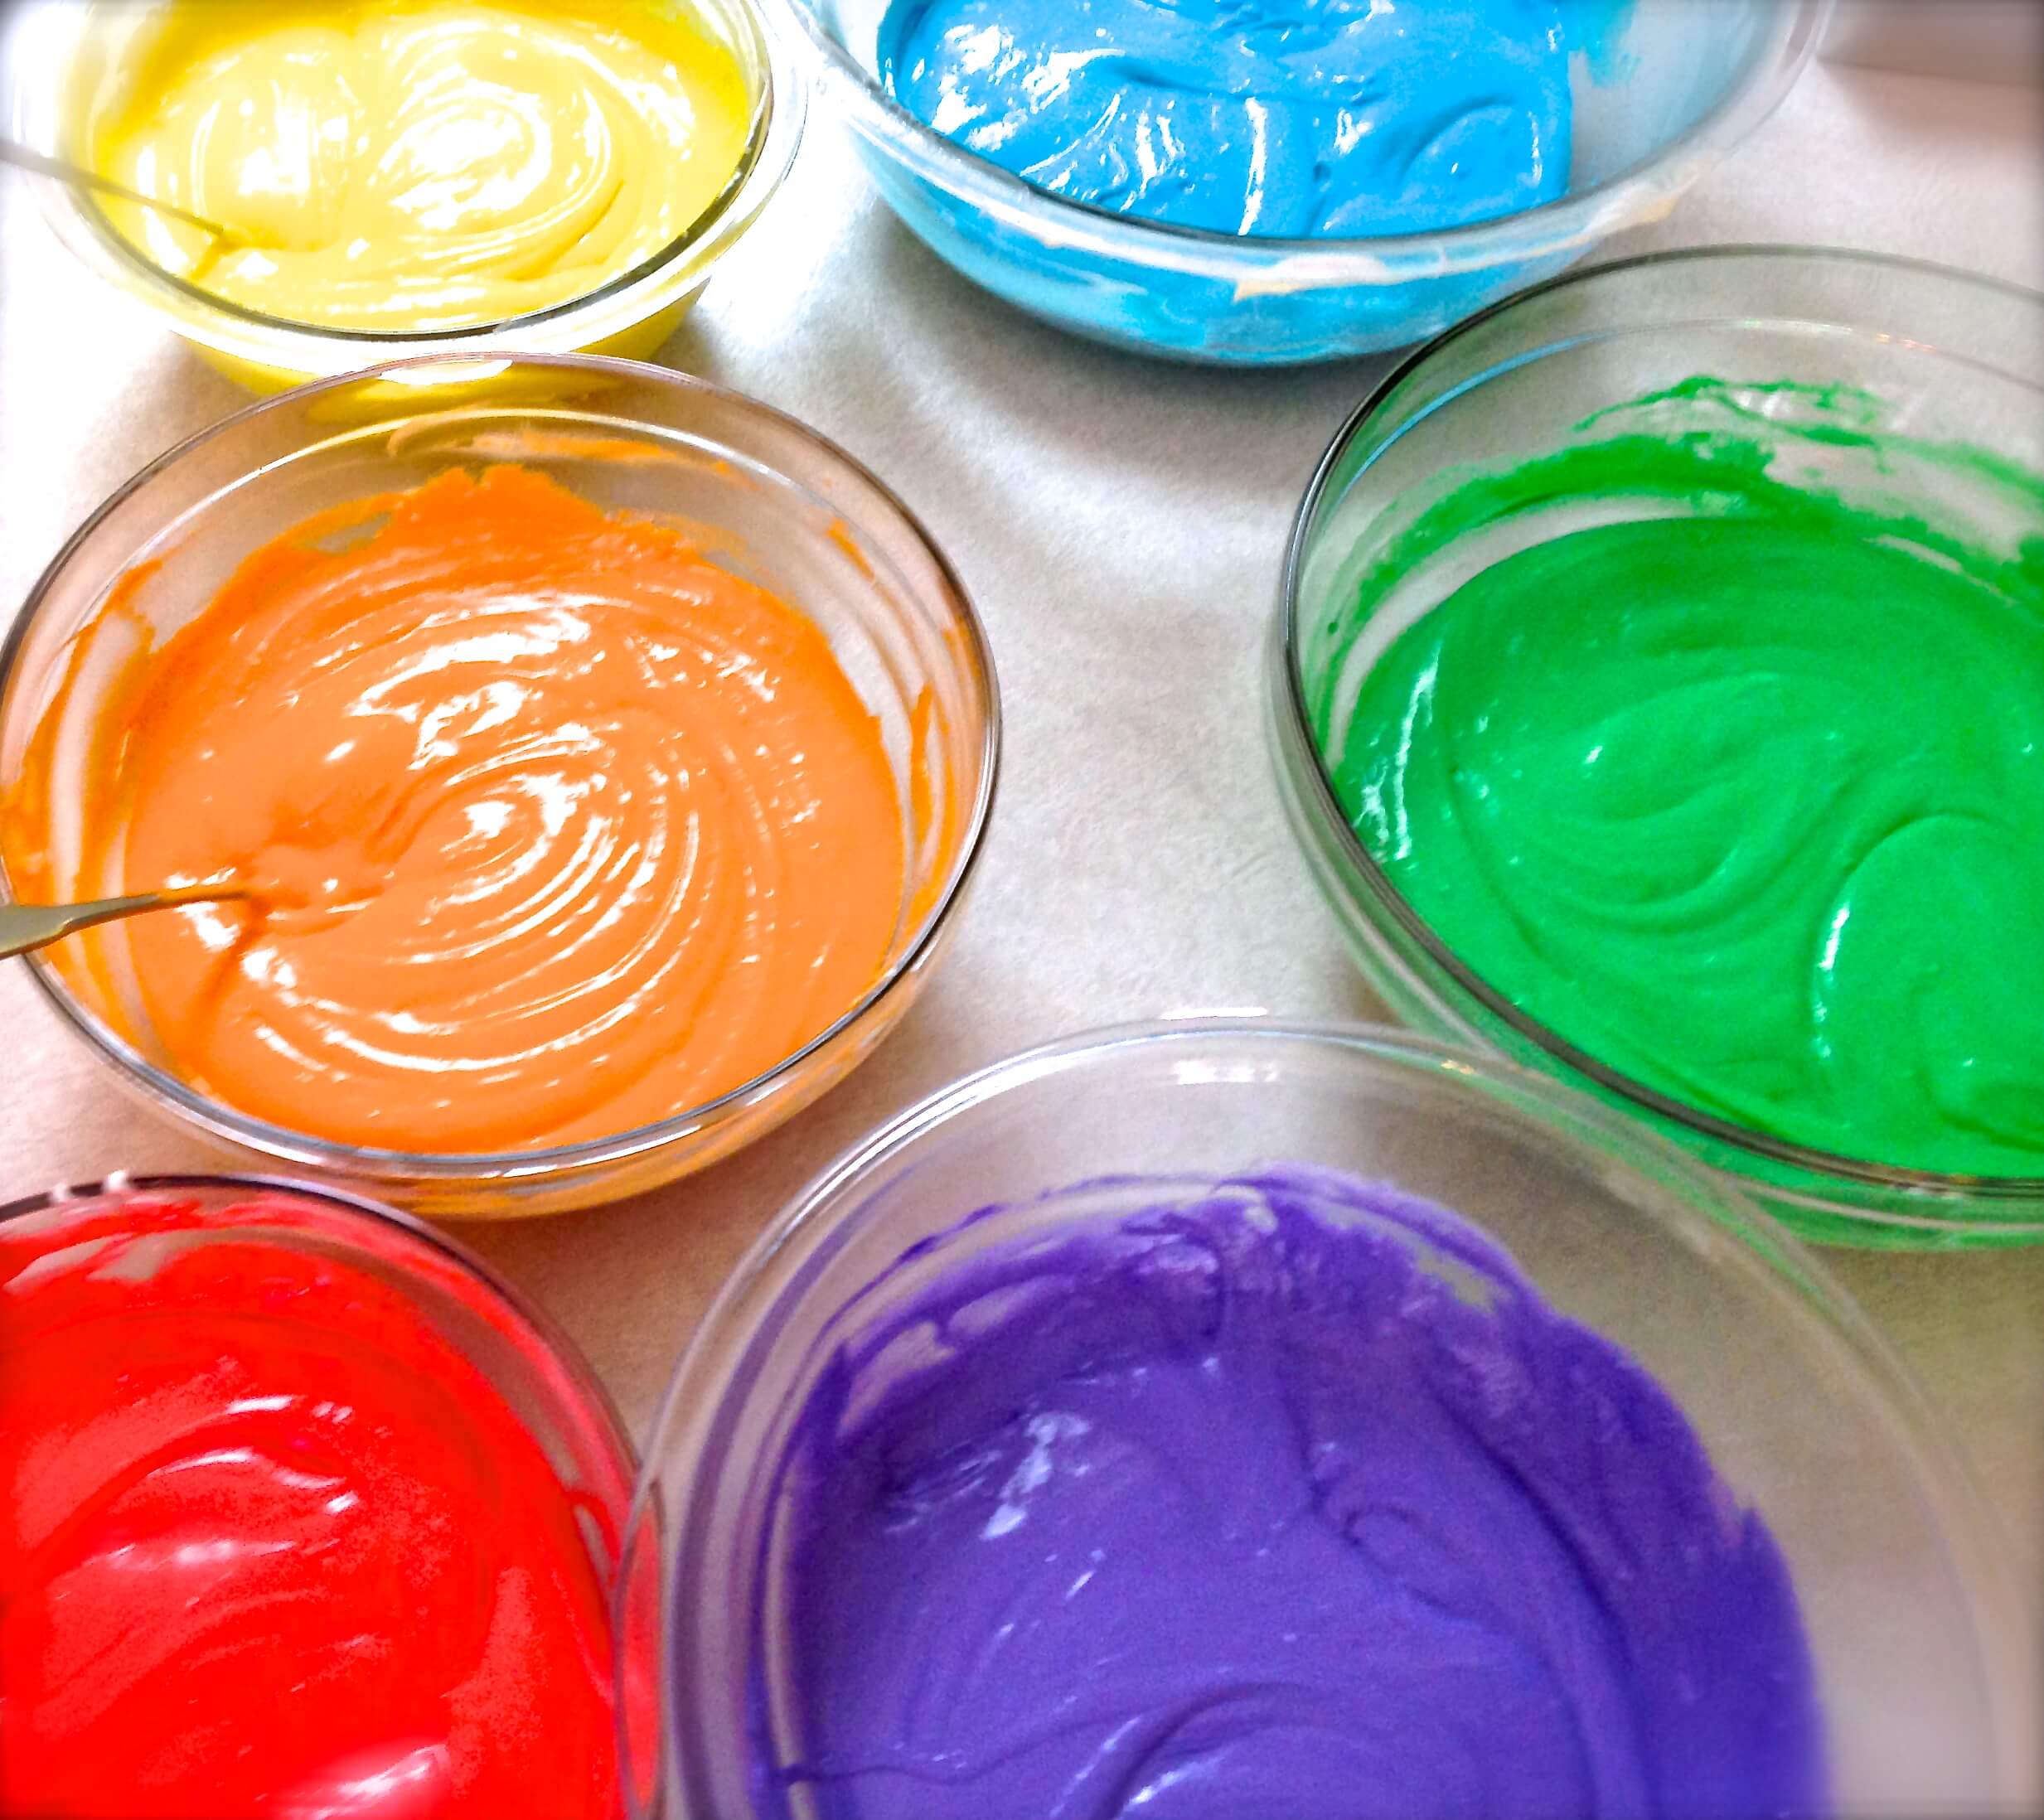 Bowls of dyed cake batter in blue, orange, yellow, green, purple, and red.